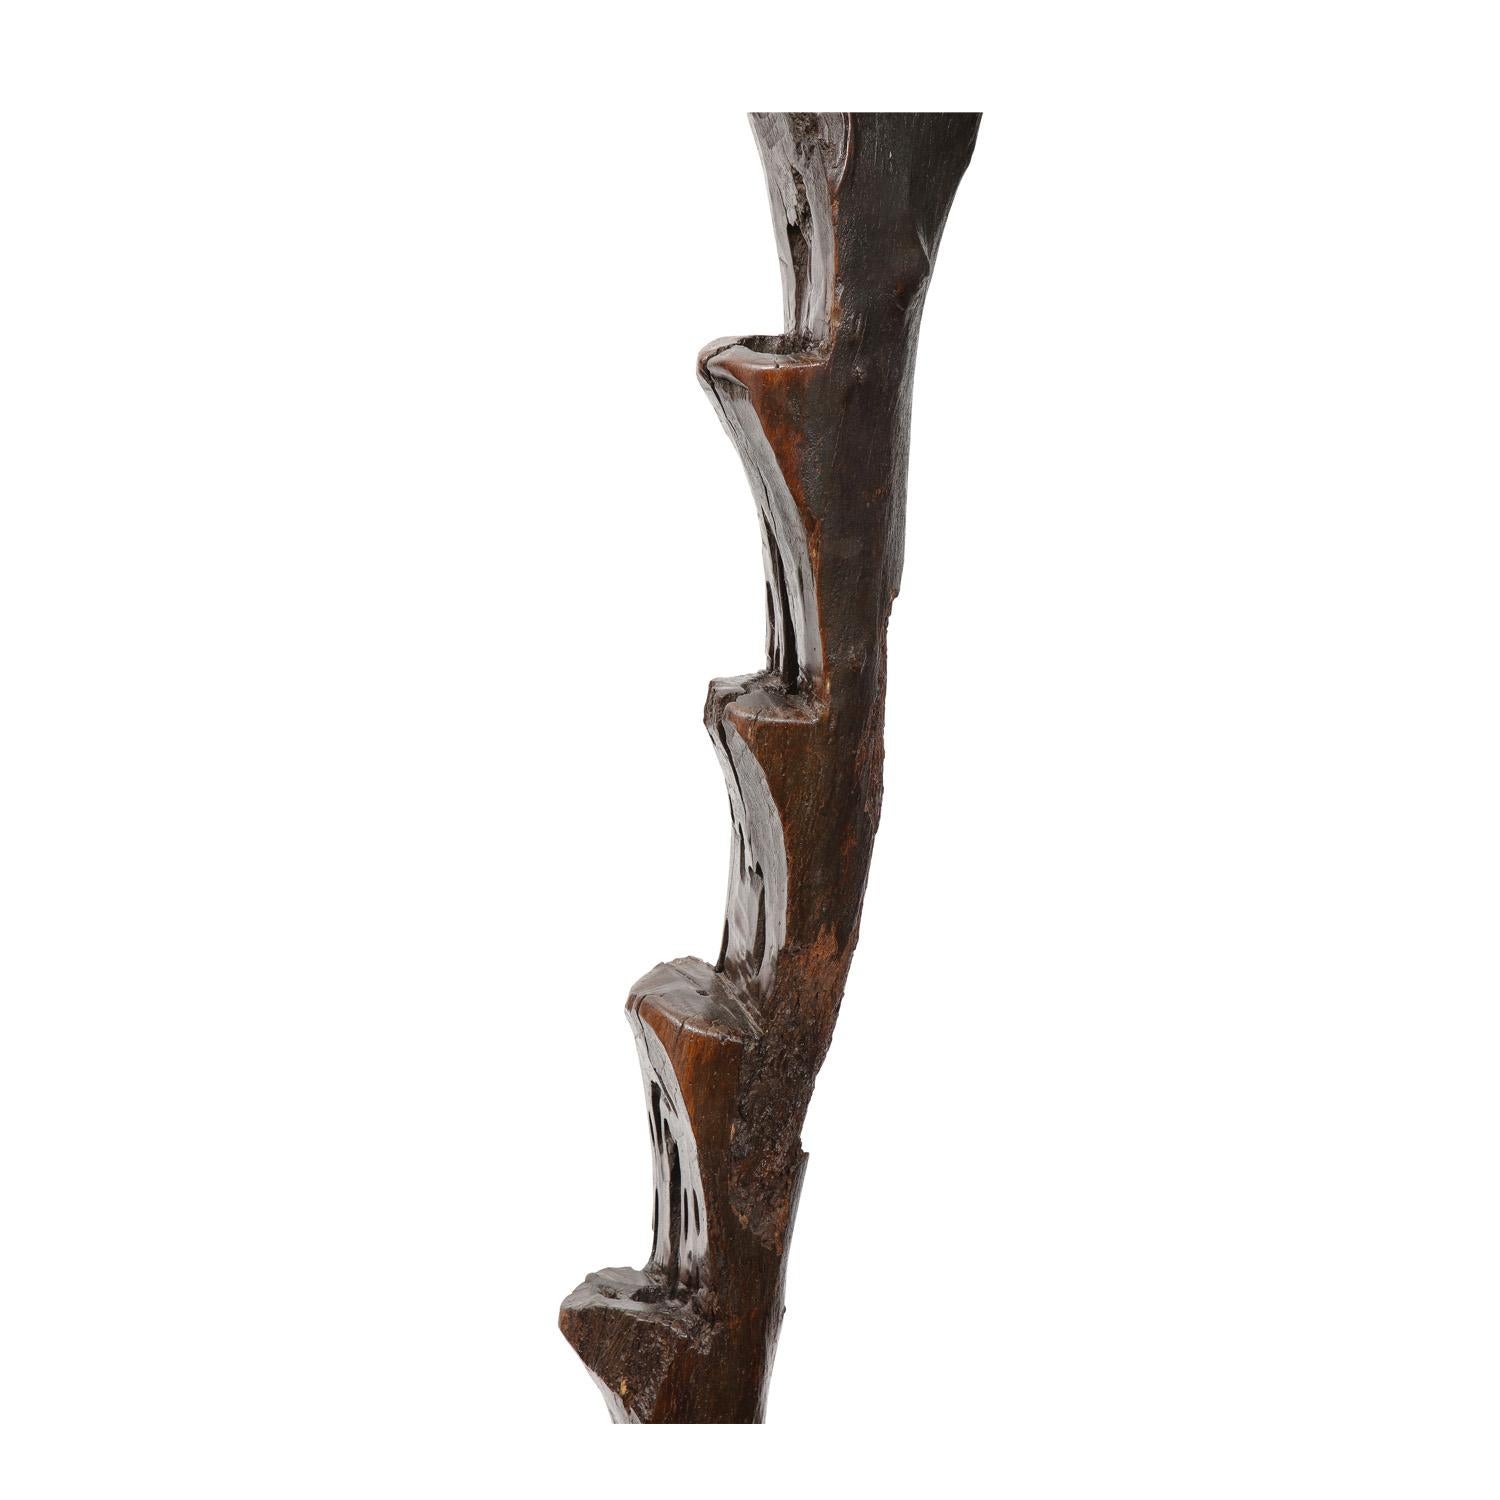 Malian African Hand-Carved Wooden Ladder Sculpture 20th Century For Sale